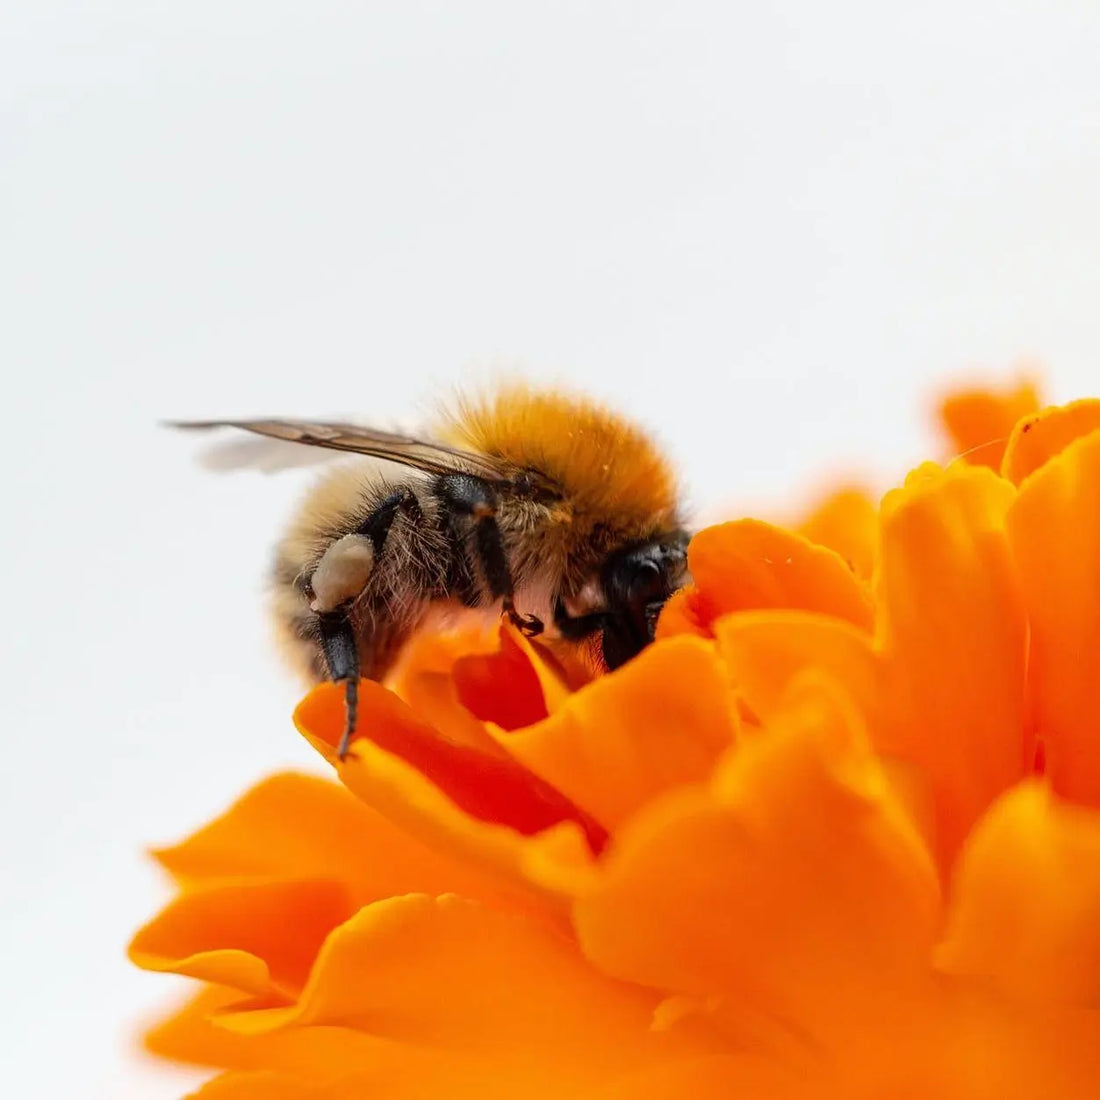 Are Bees Colorblind?